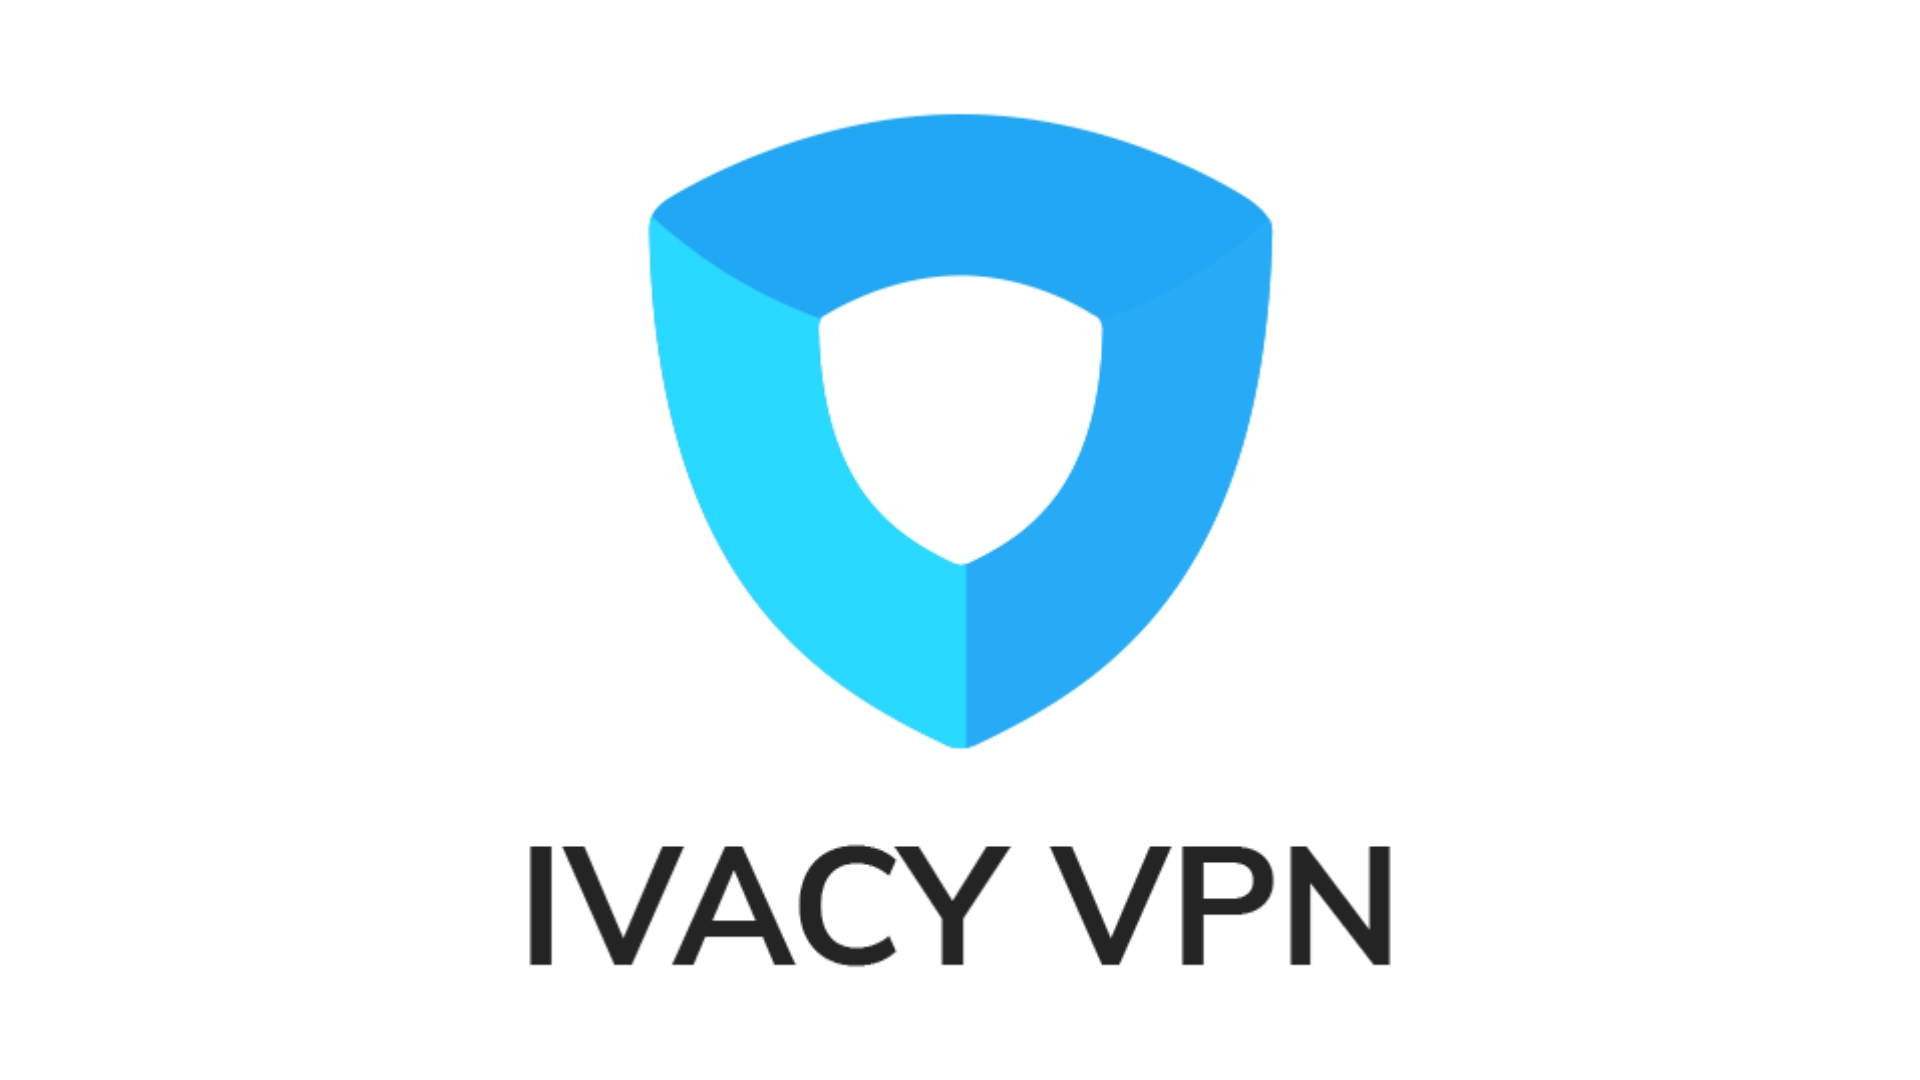 Best Canadian VPN: Ivacy VPN.  The image shows the company logo.